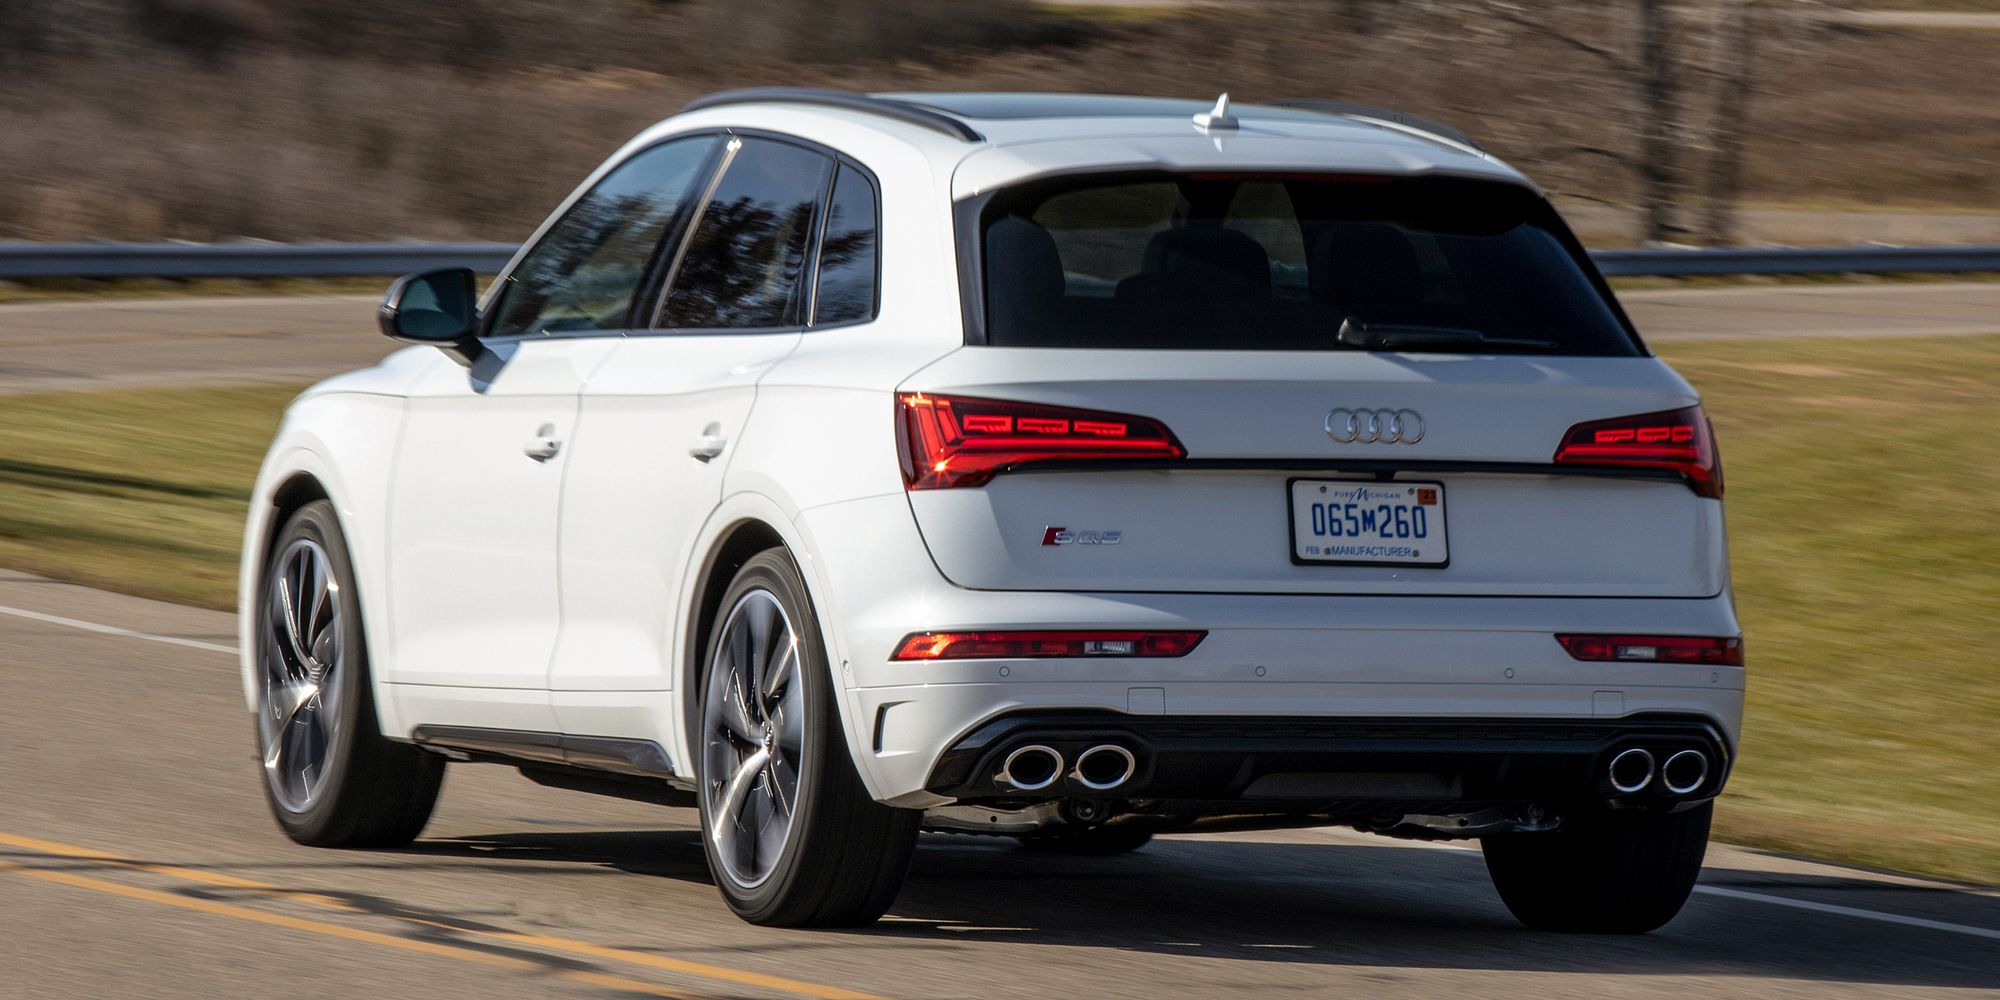 The back of the SQ5